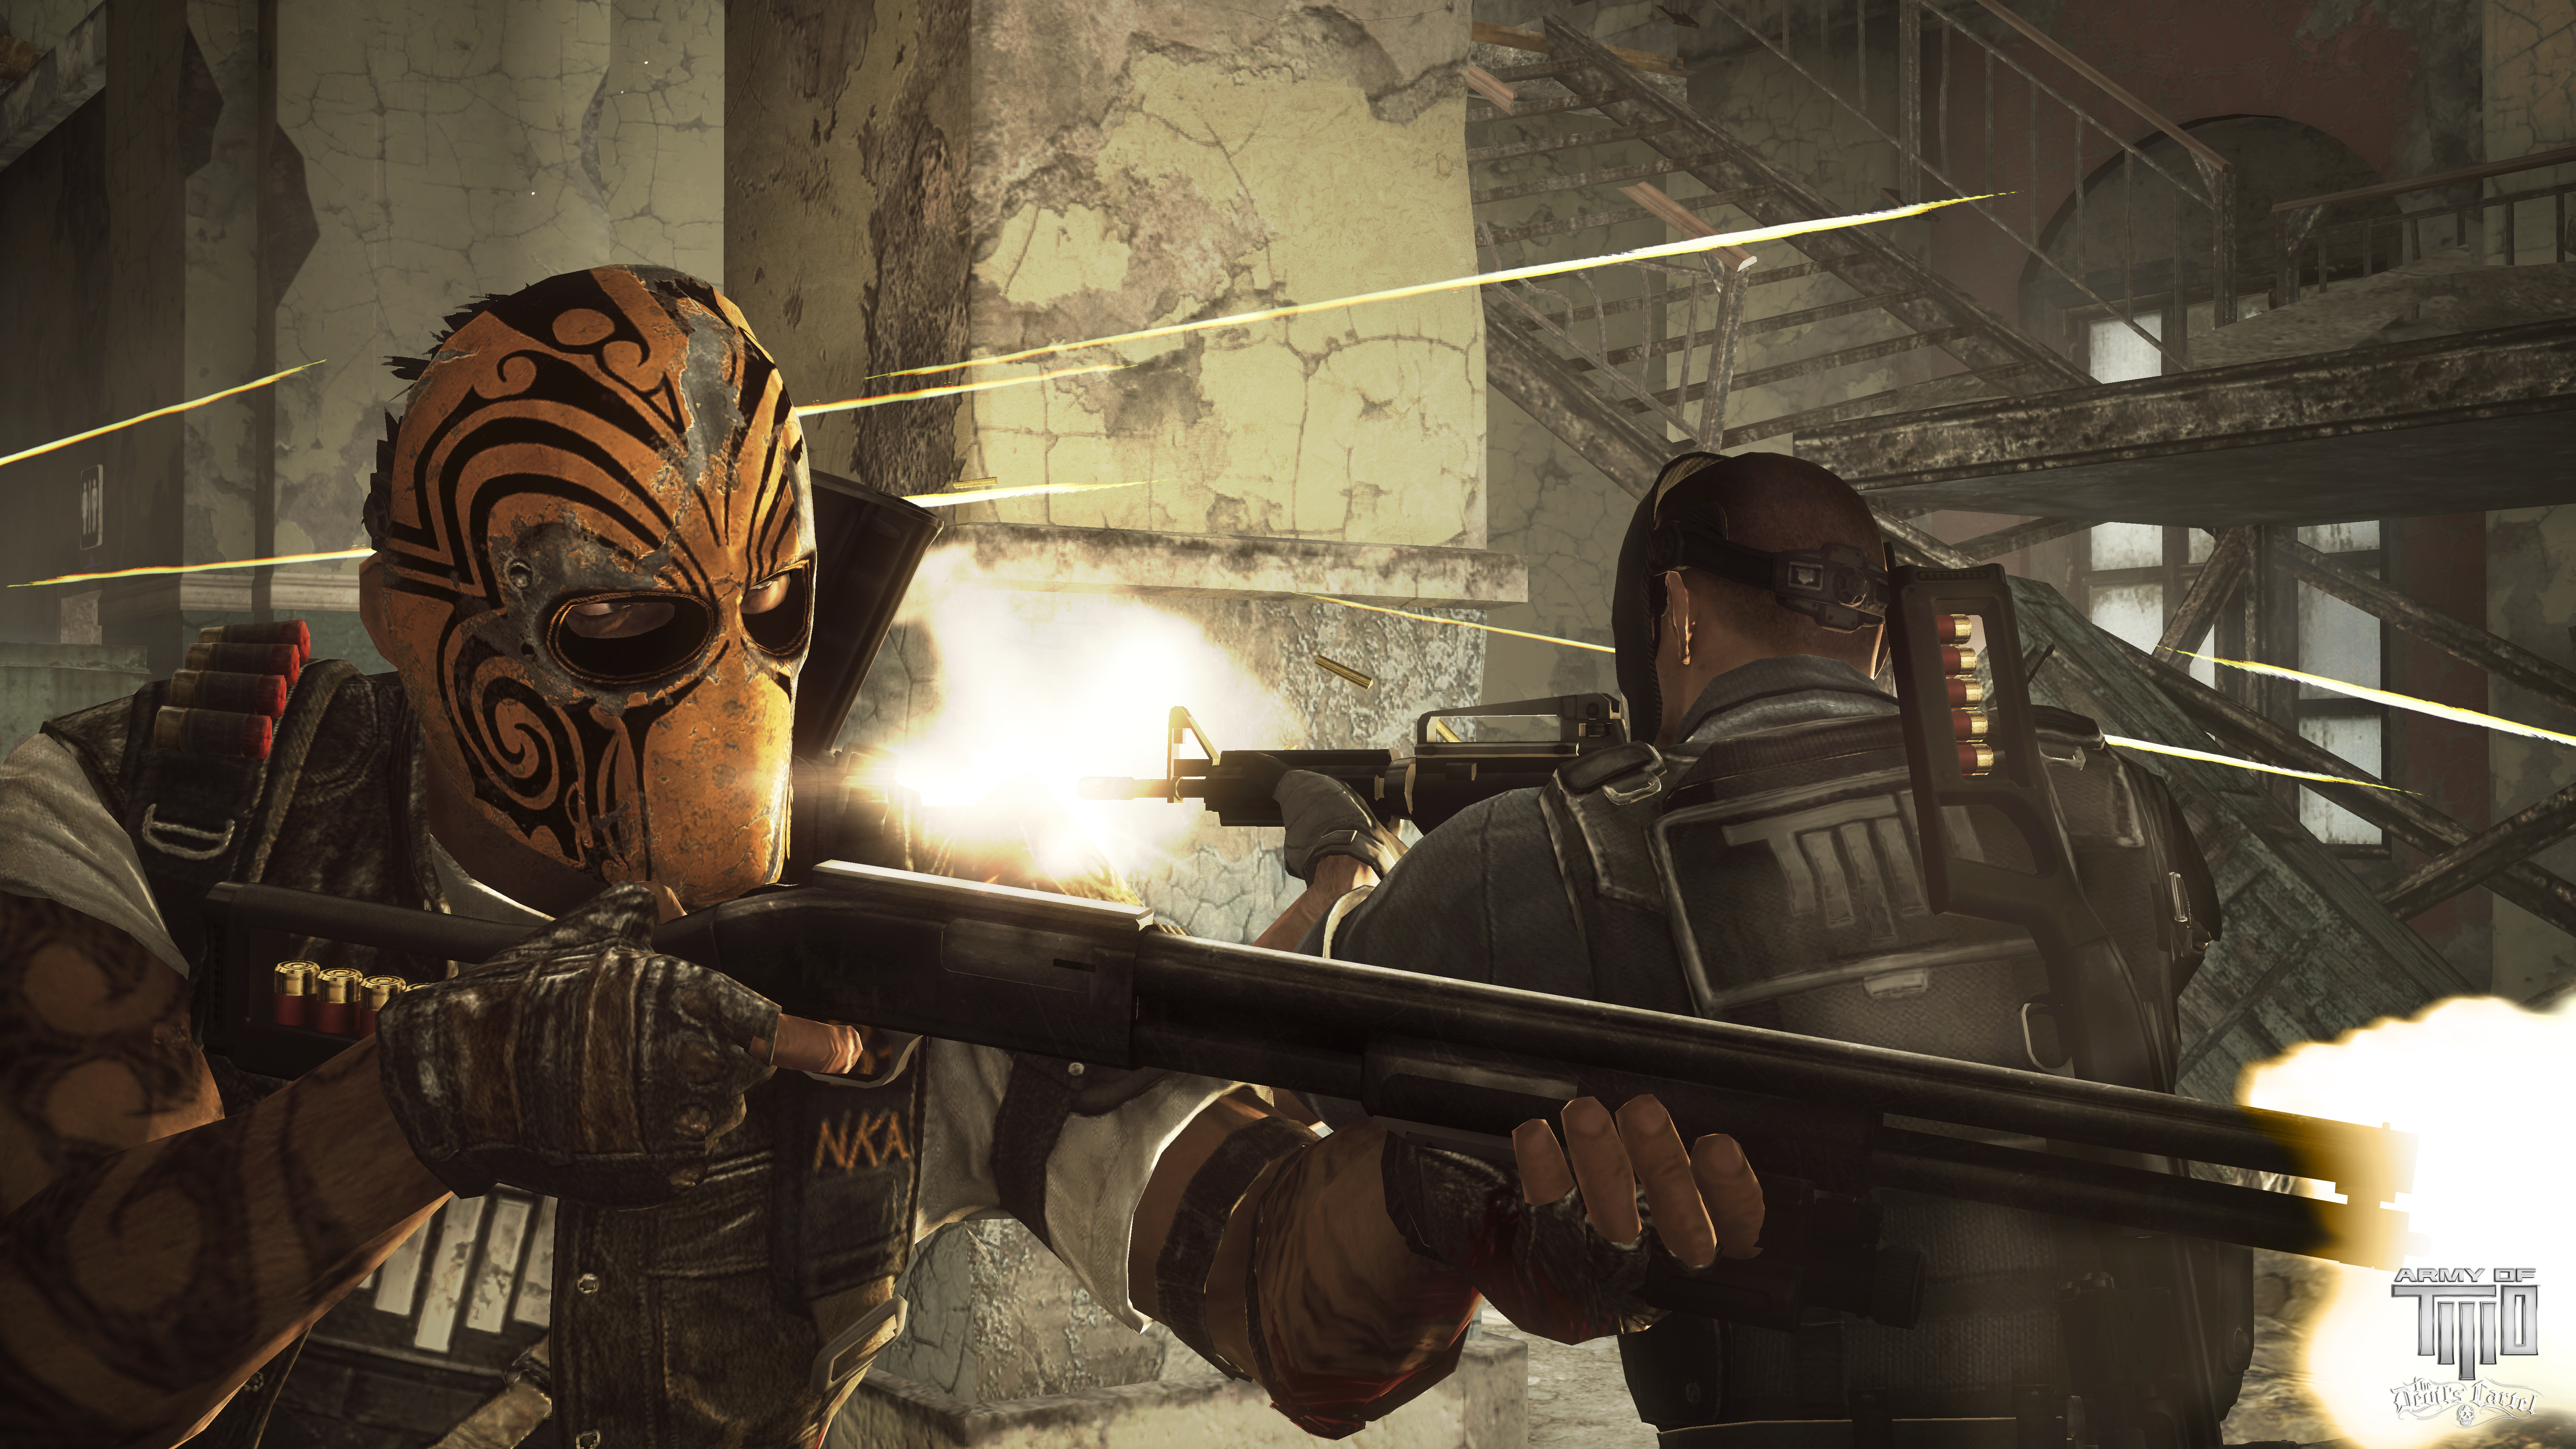 army of two pc